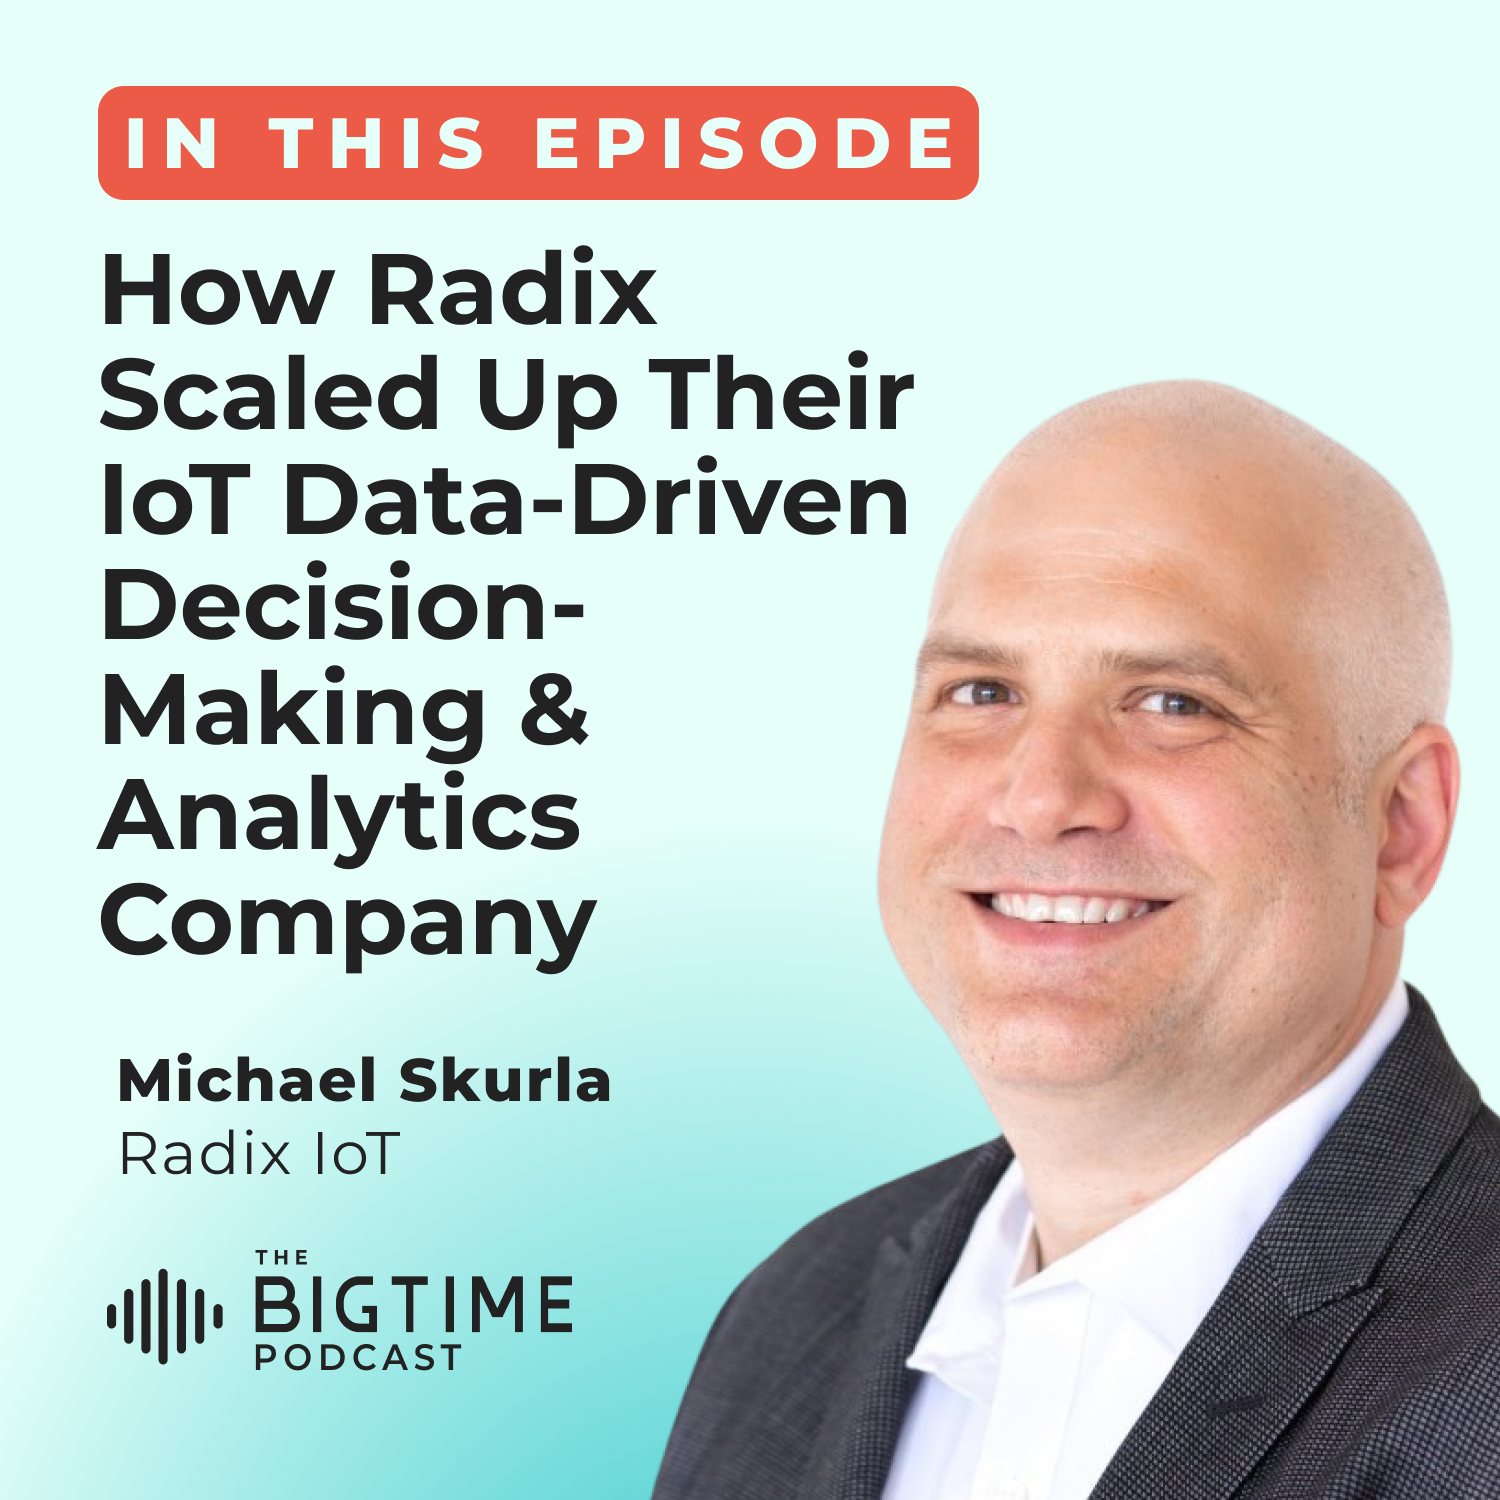 How Radix Scaled Up their IoT Data-Driven Decision-Making & Analytics Company